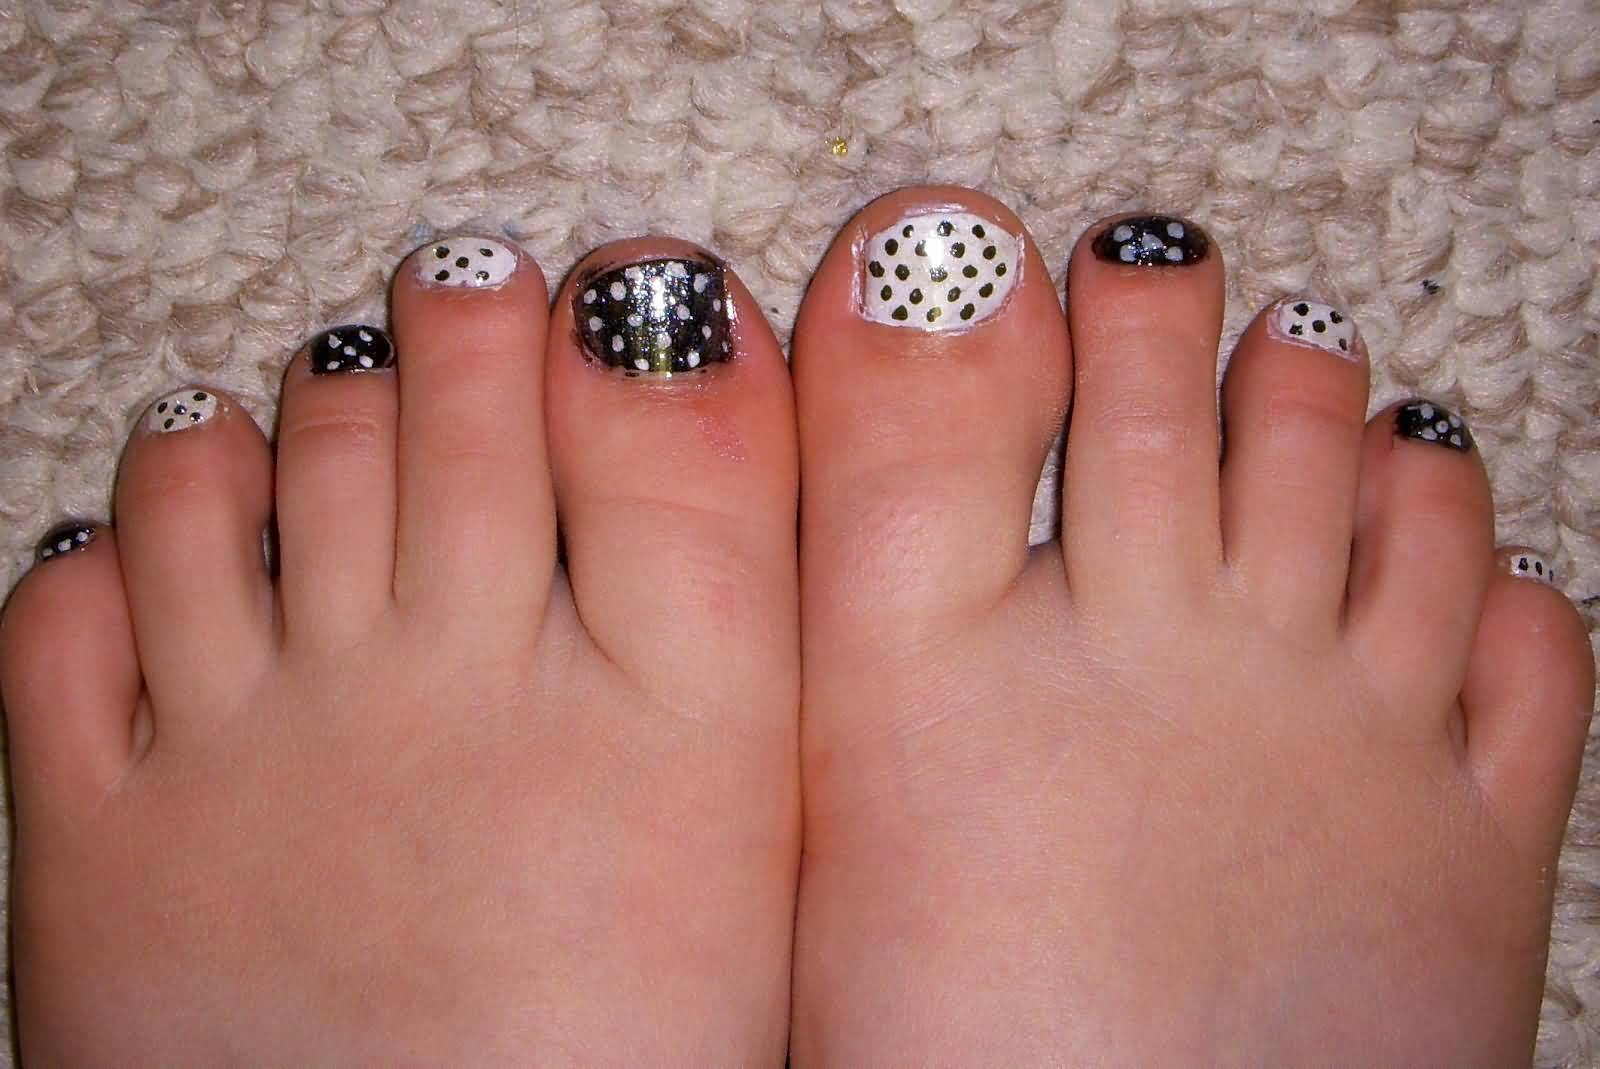 4. Black and White Nail Art Experts for Hire - wide 5